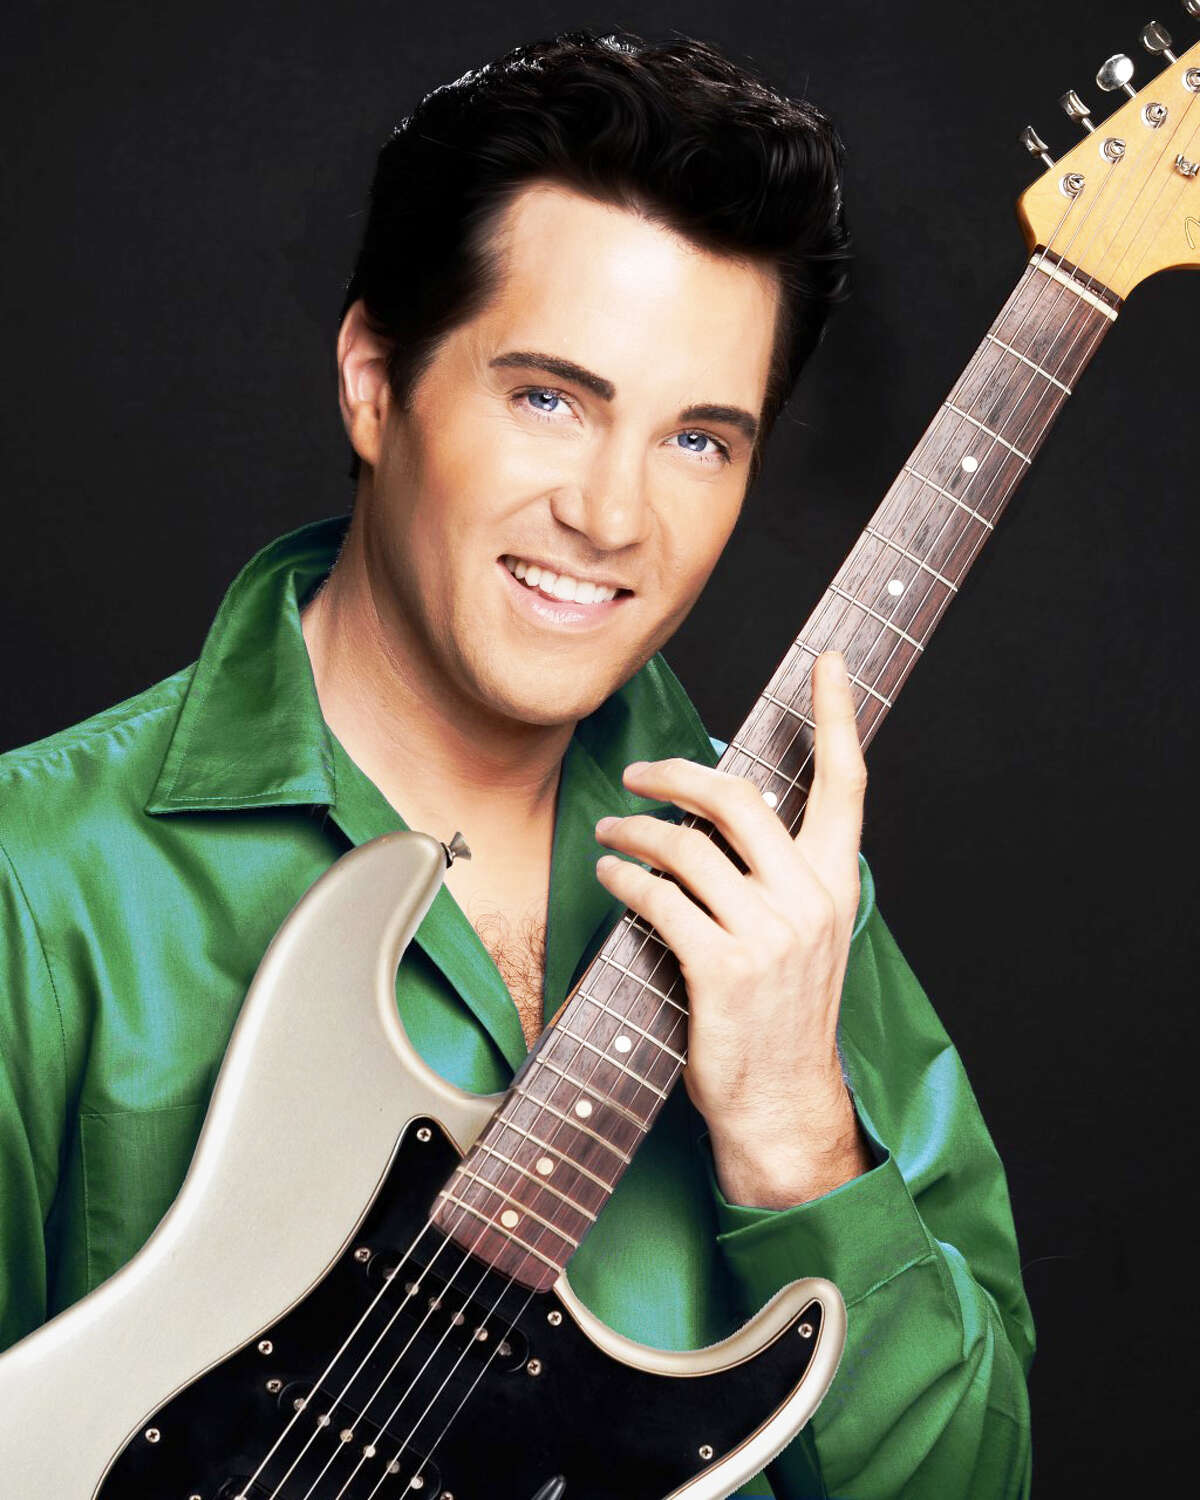 Cheshire’s Nelson Hall Theatre at Elim Park will be presenting musician Travis LeDoyt as Elvis Friday at 2 and 7:30 p.m.